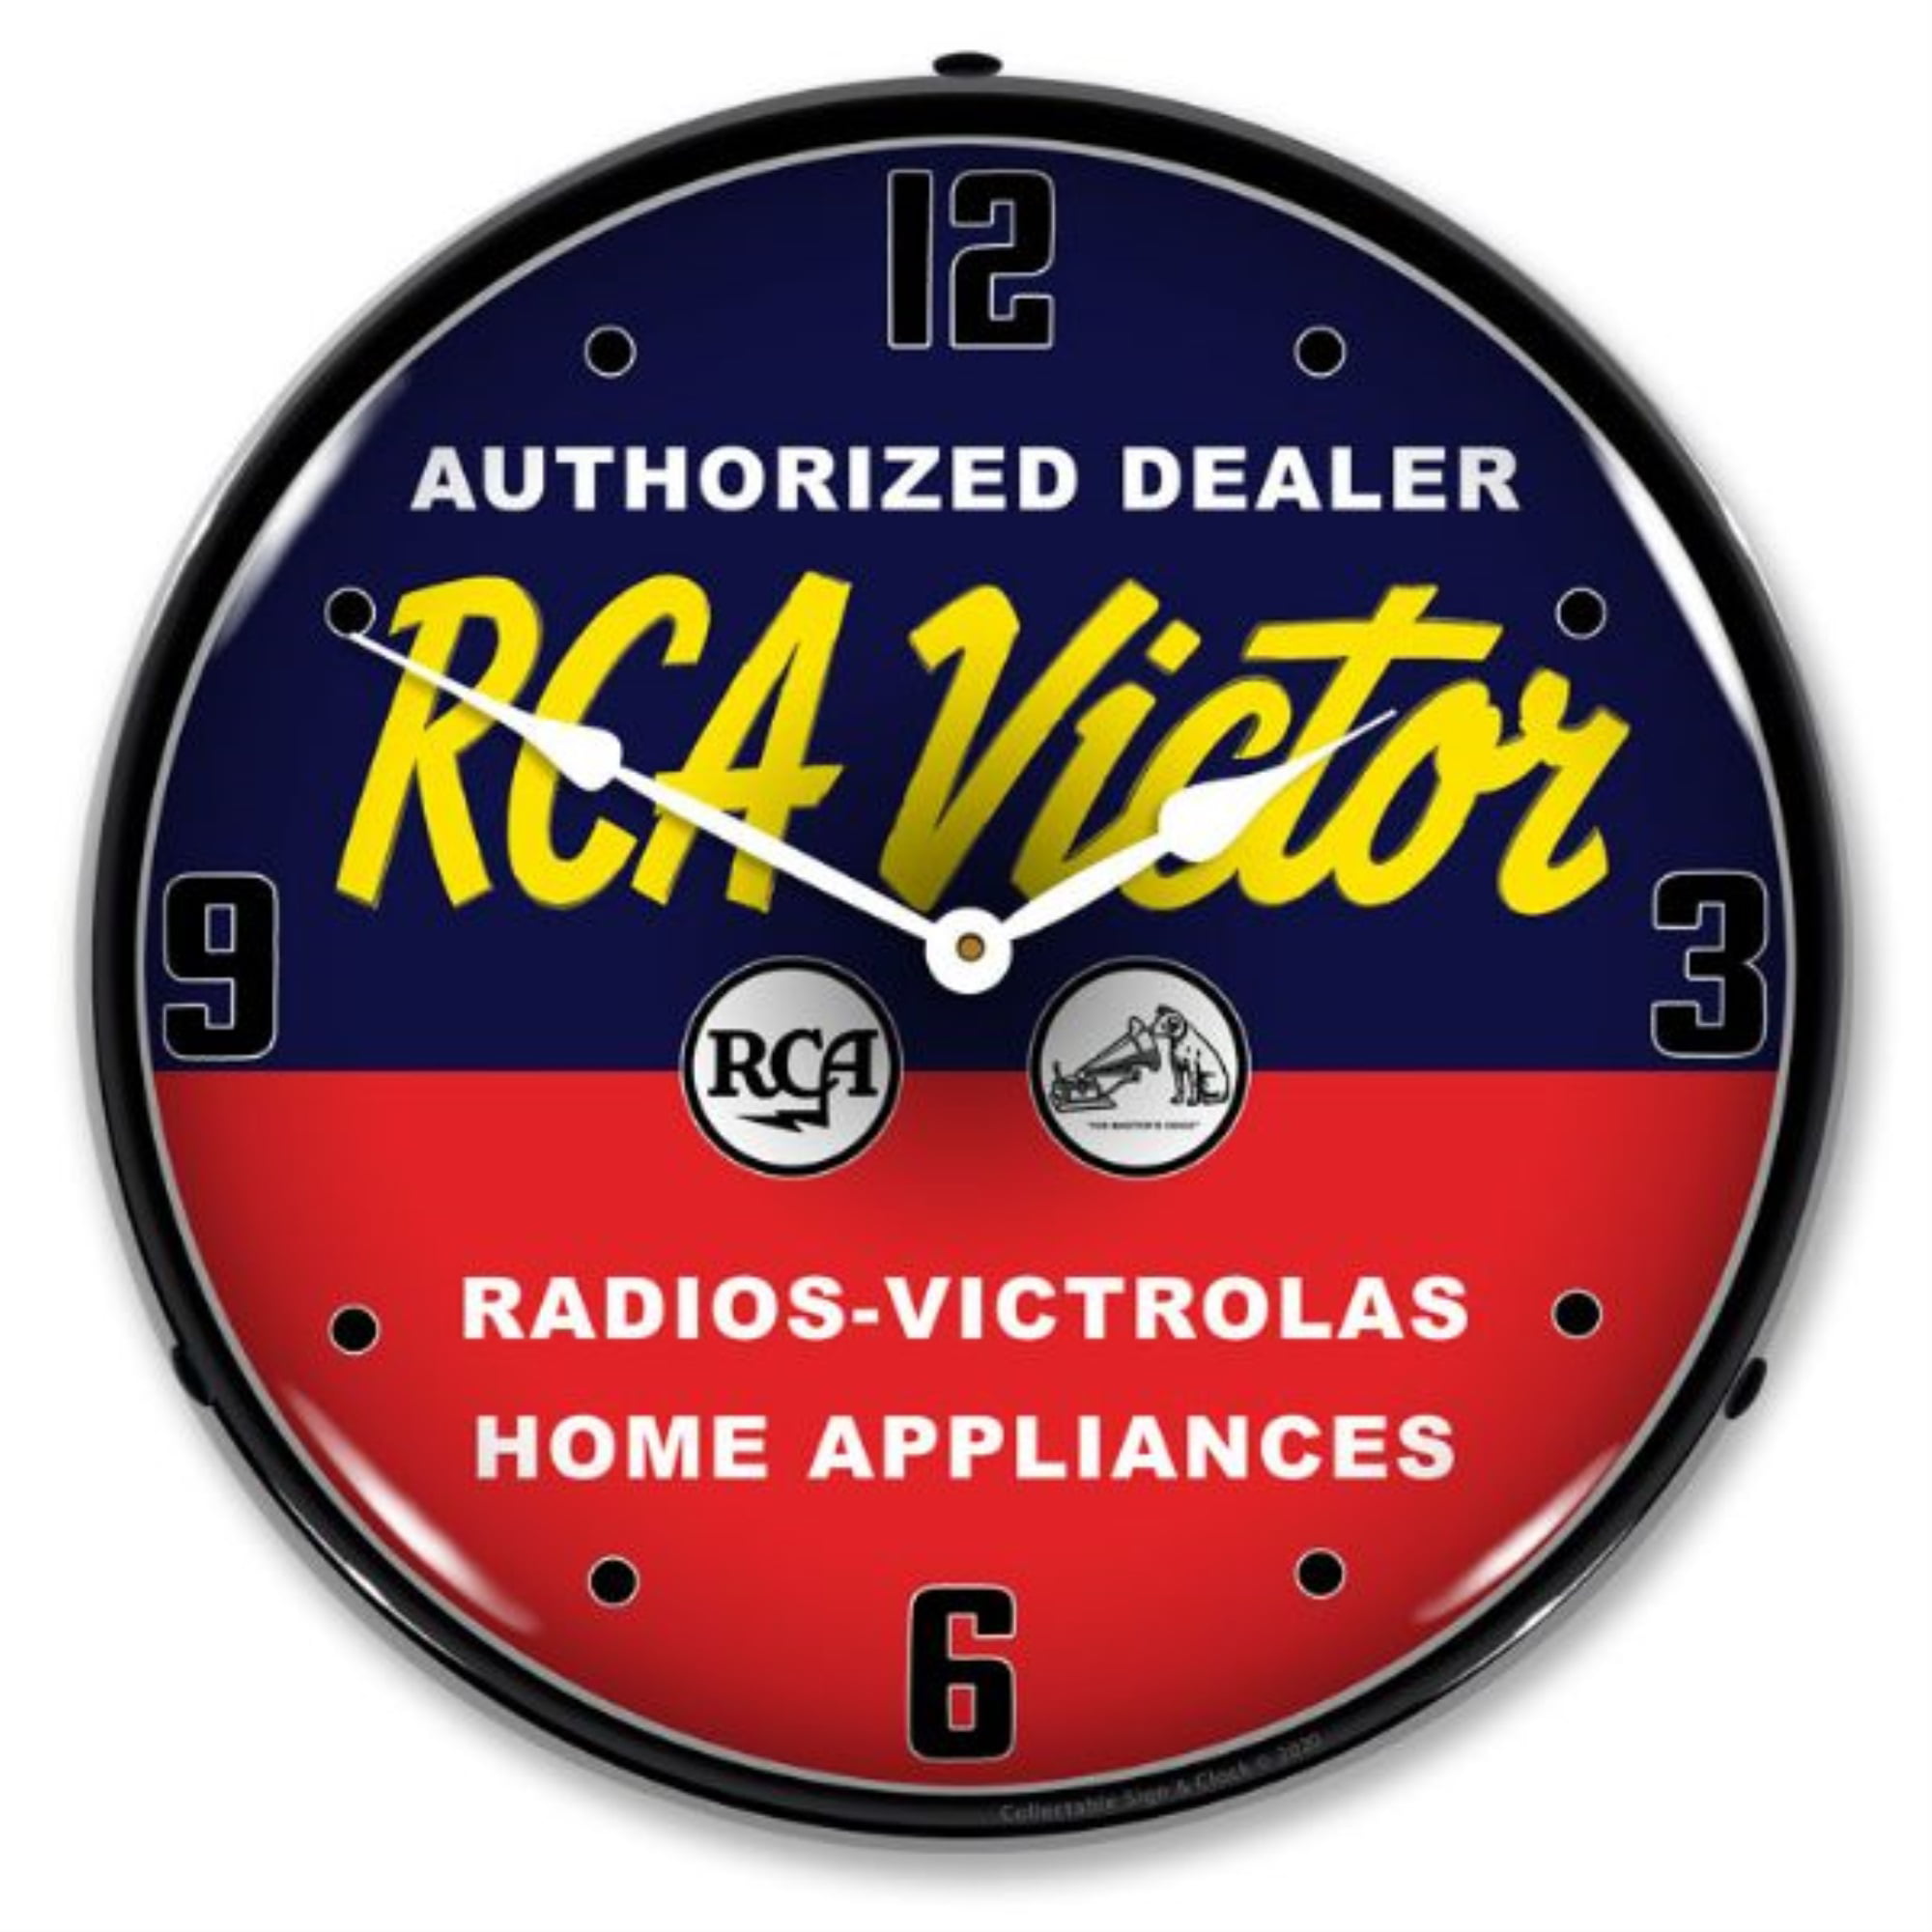 RCA VICTOR COLOR TV AUTHORIZED DEALER 9" x 12" Sign 